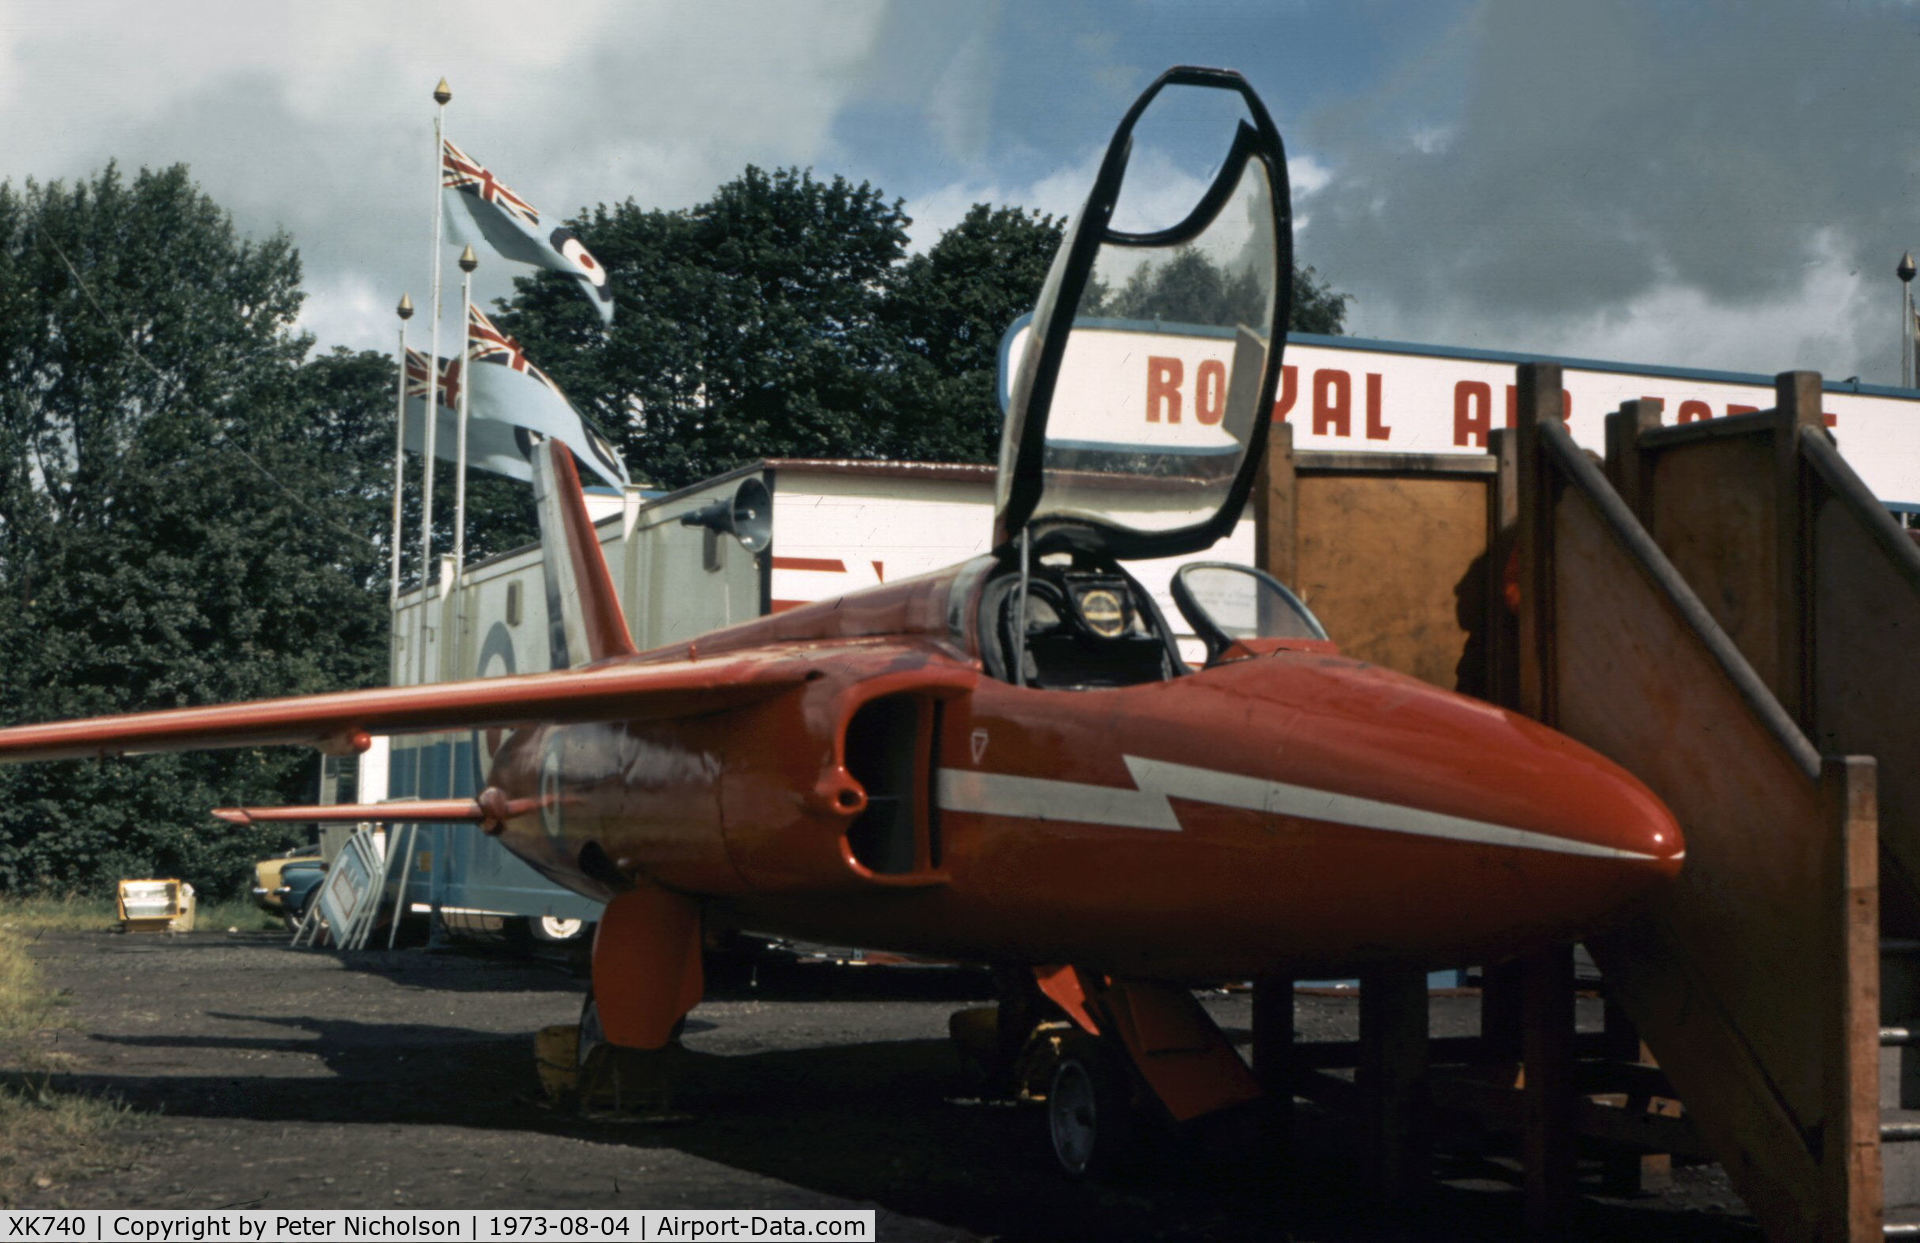 XK740, 1957 Folland Gnat F.1 (Fo-141) C/N FL4, Gnat F.1 in the Red Arrows colour scheme used as a recruiting airframe at Carlisle in the Summer of 1973.